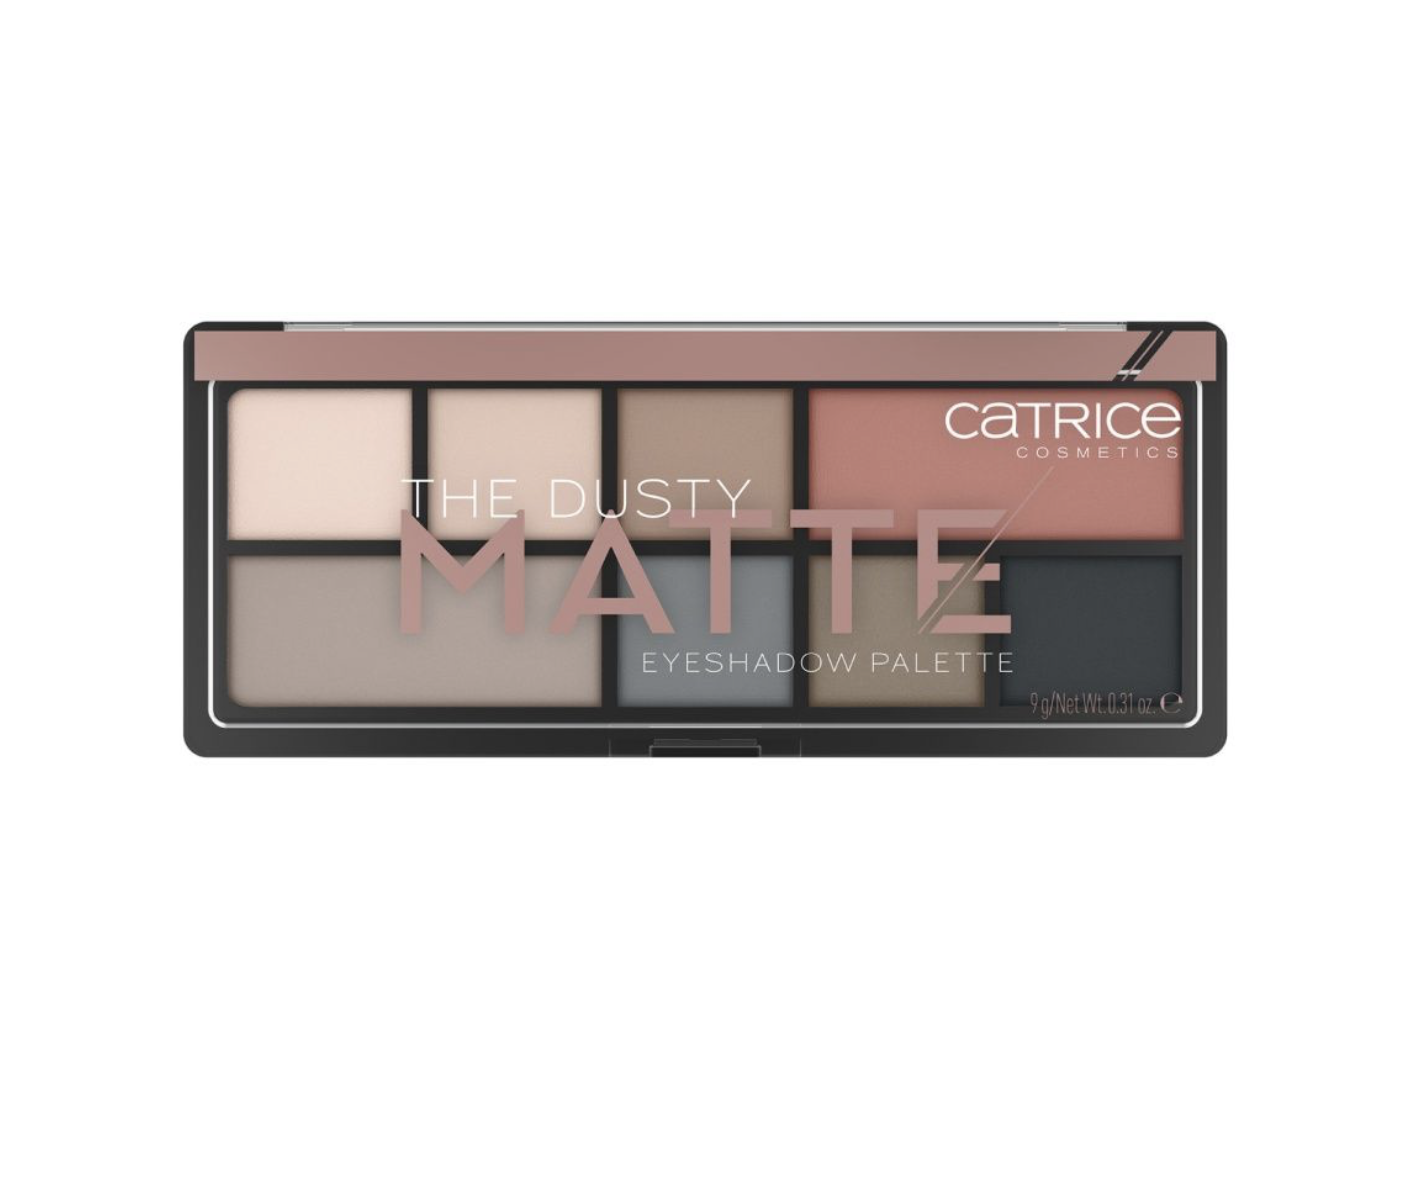   / Catrice -     The Dusty Matte 9 